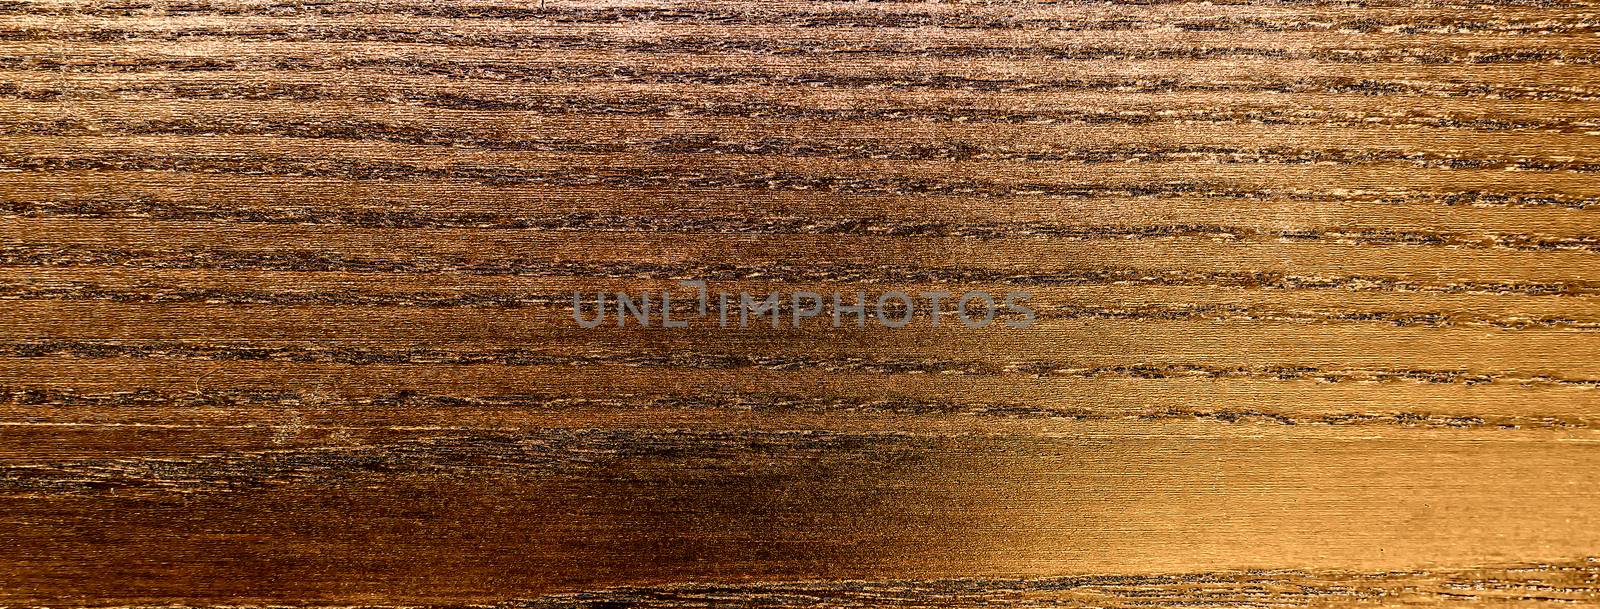 Wooden texture for background by marcorubino